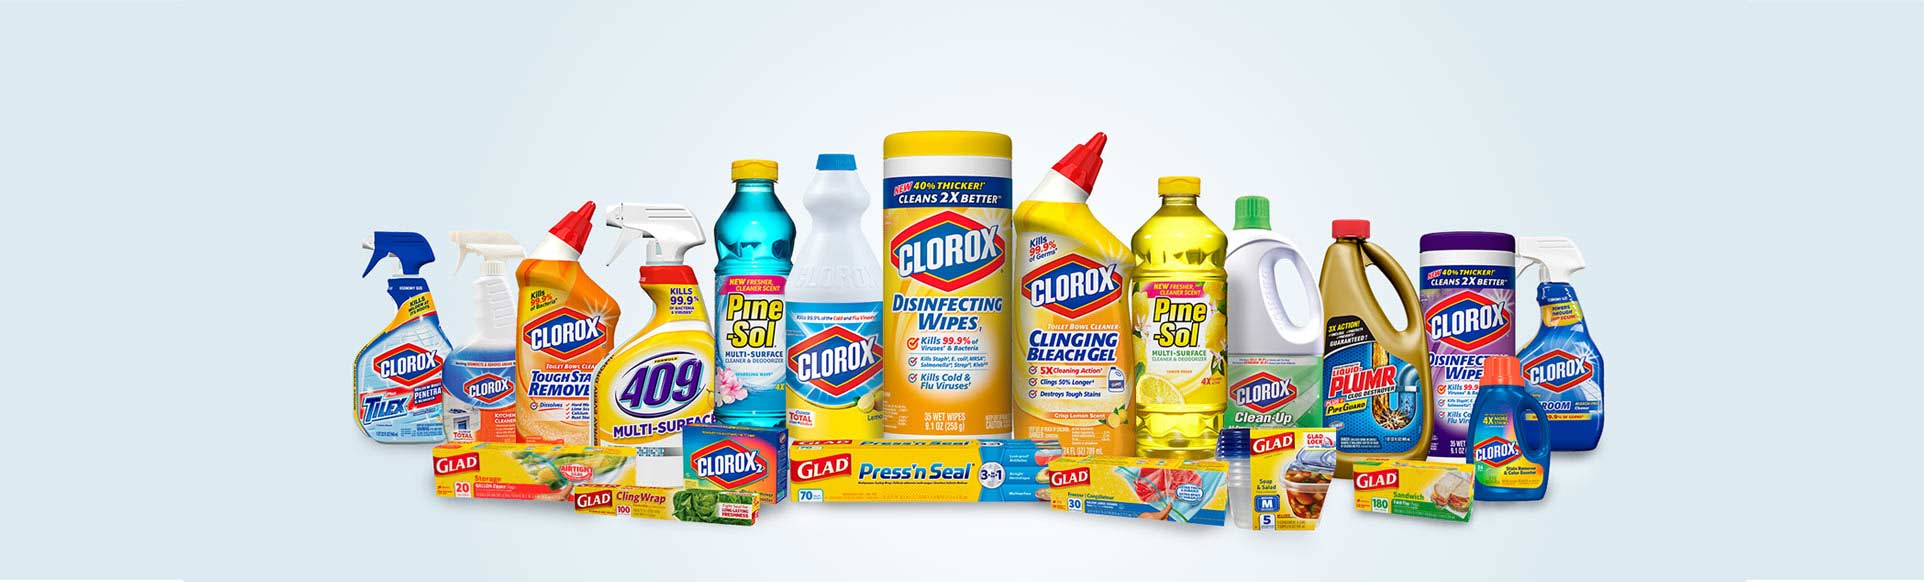 About Clorox